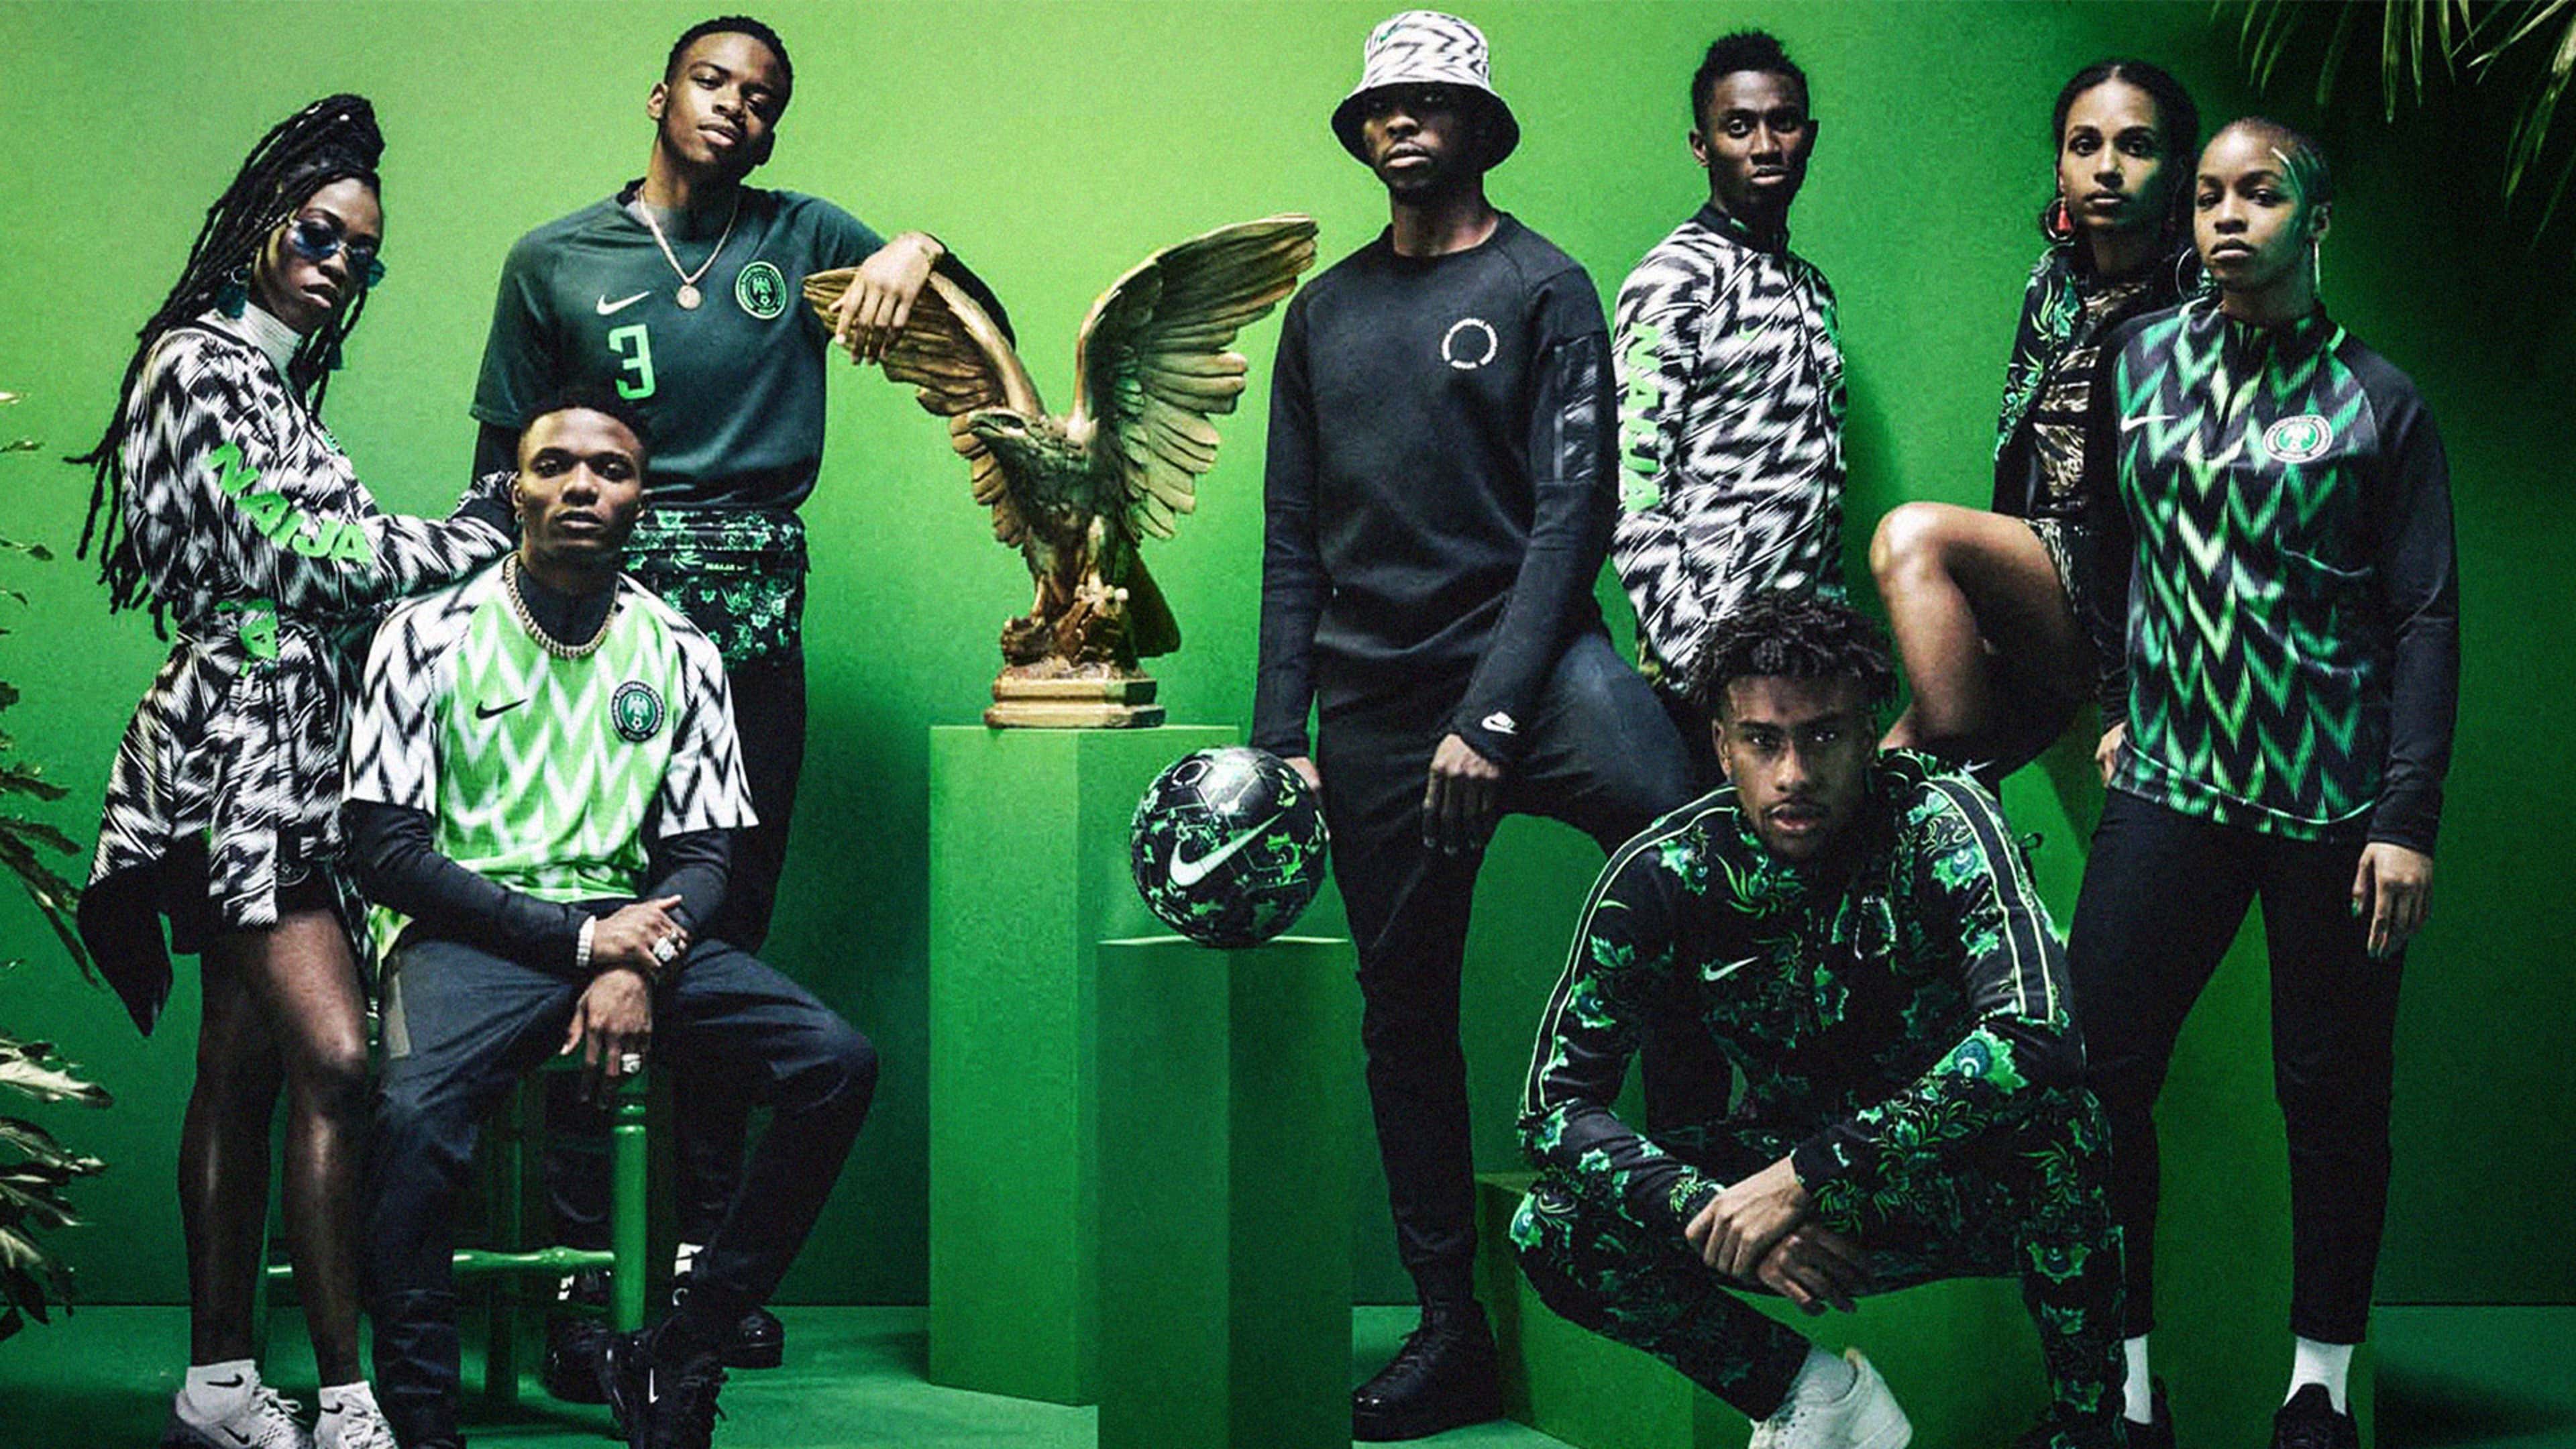 Louis Vuitton Releases American Football-Inspired Apparel